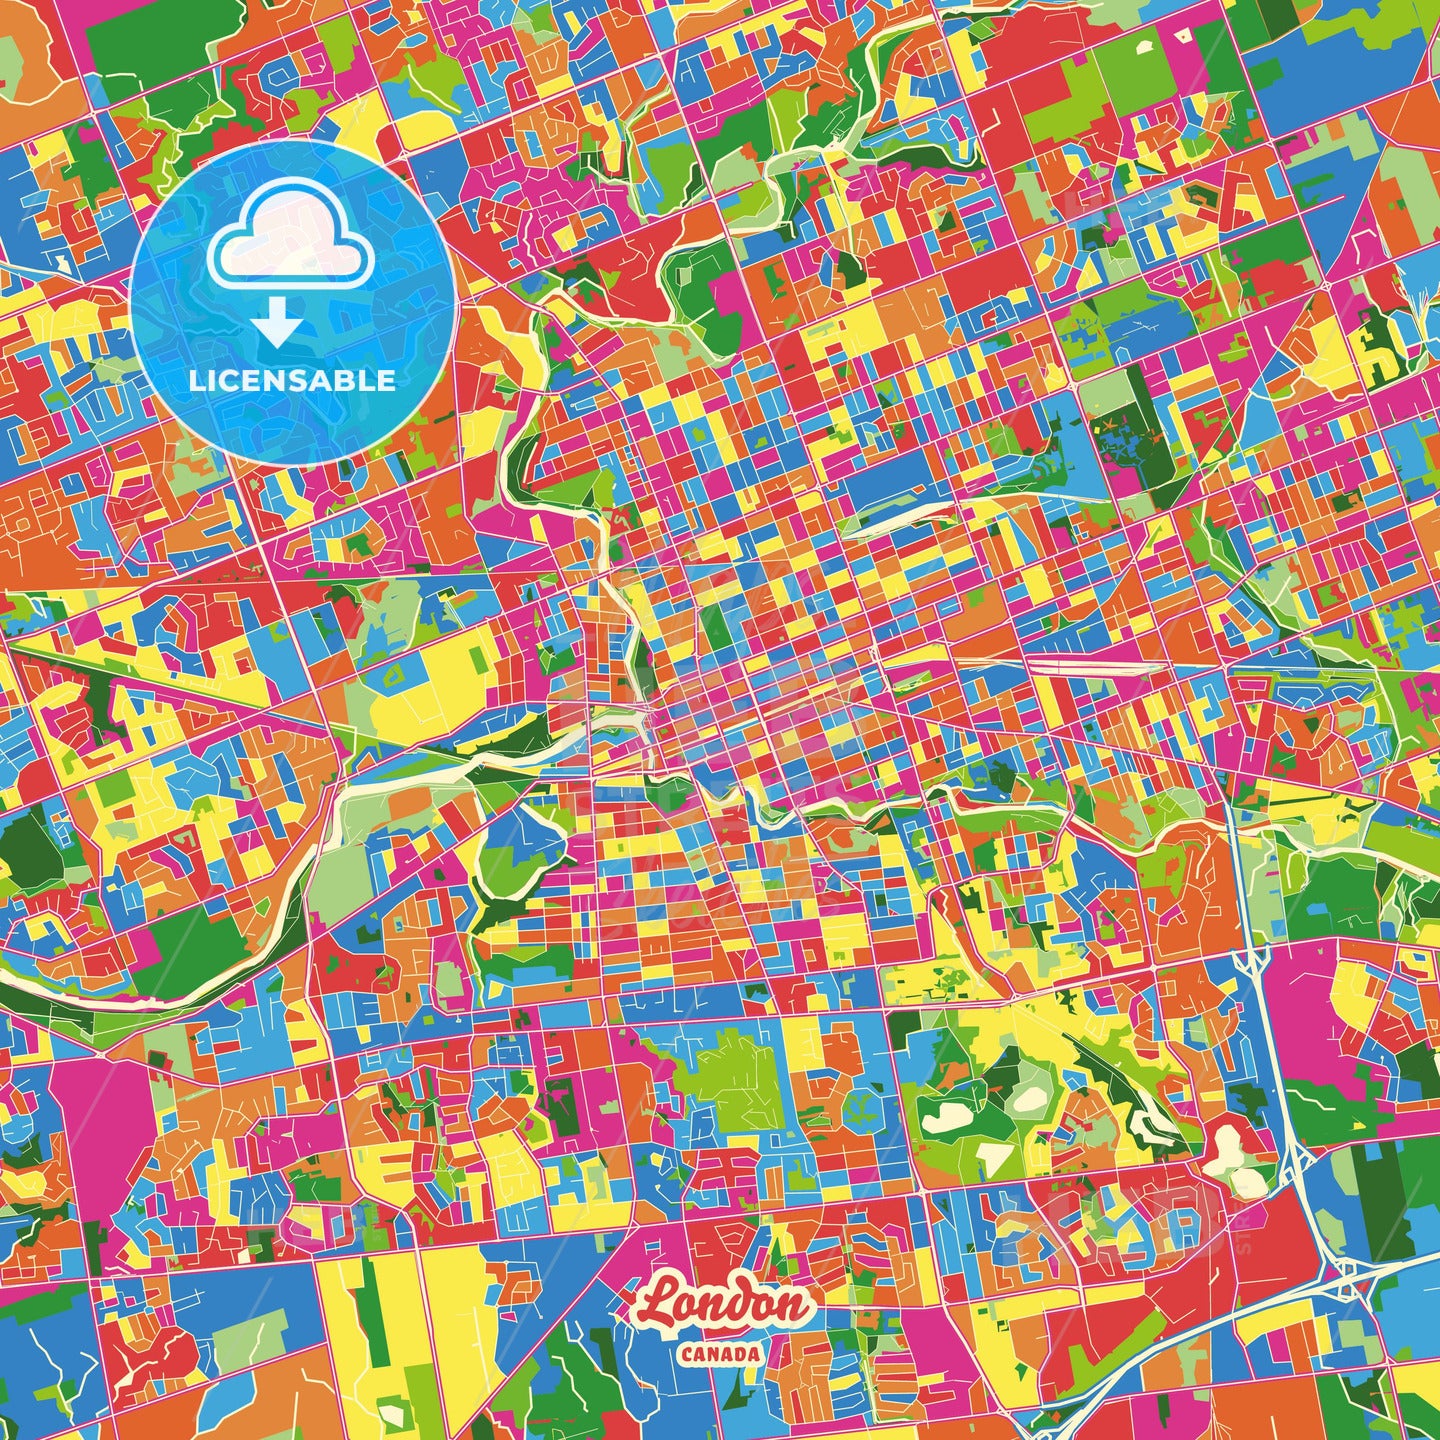 London, Canada Crazy Colorful Street Map Poster Template - HEBSTREITS Sketches